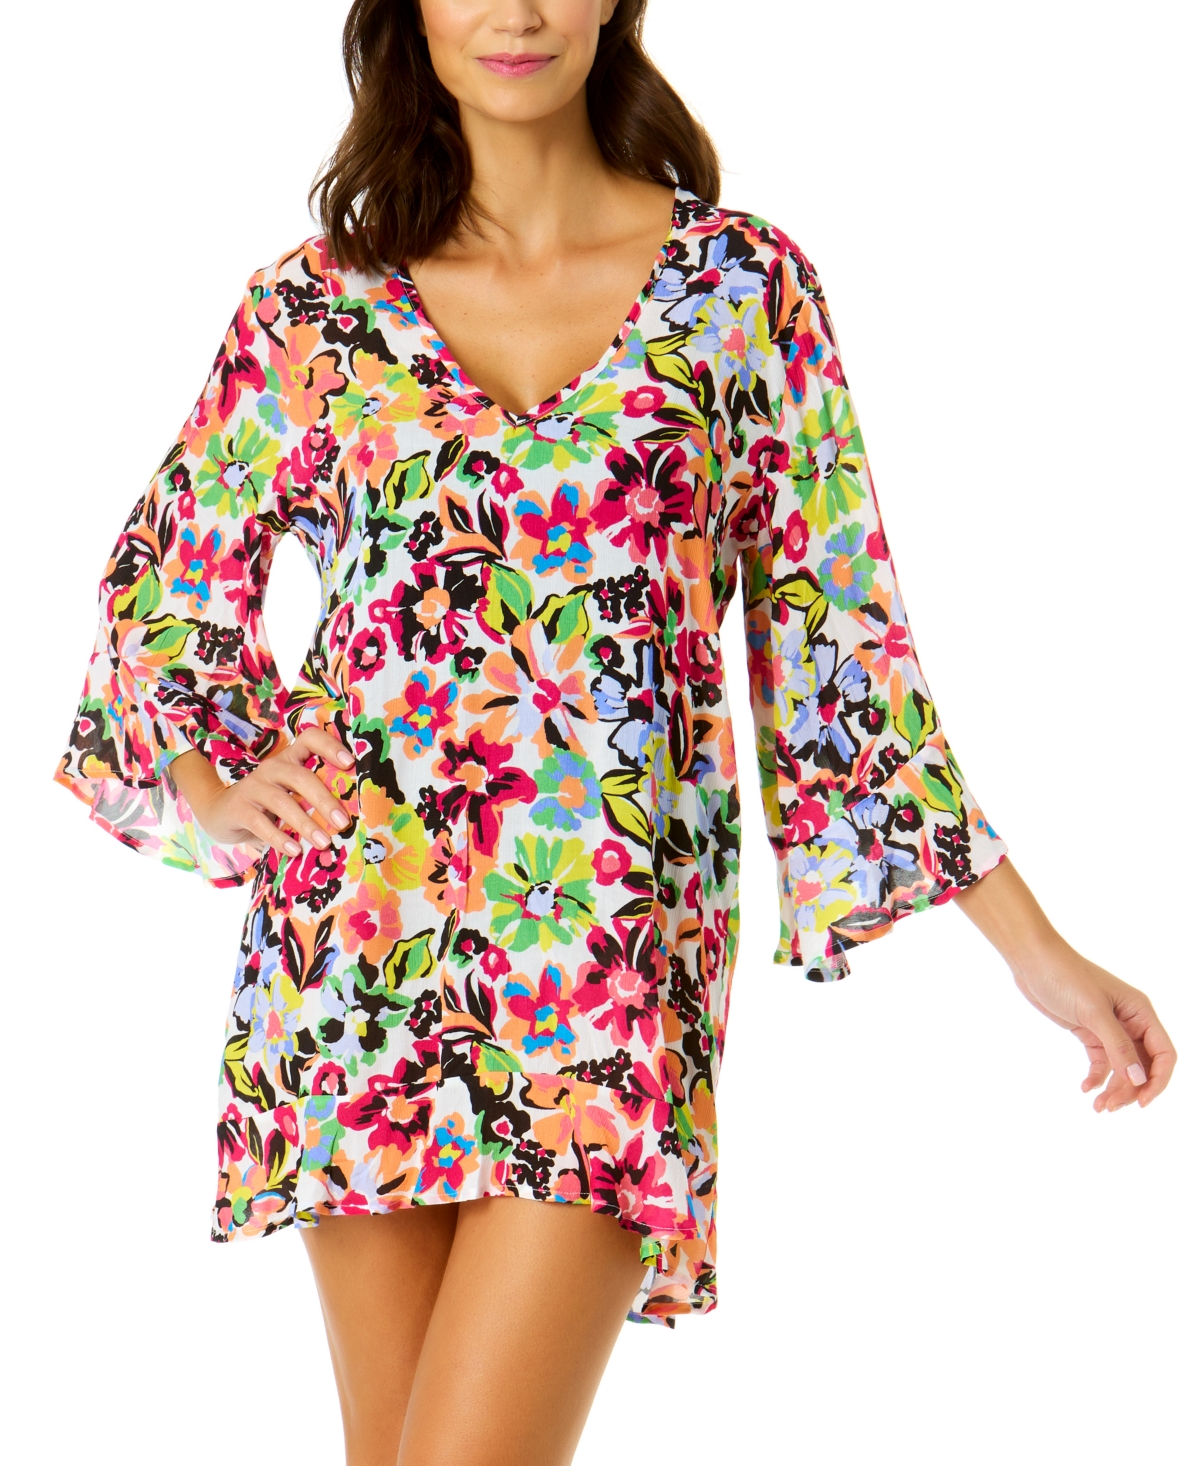 Women's Floral Flounce Cover-Up Tunic - Sun Blossom Multi